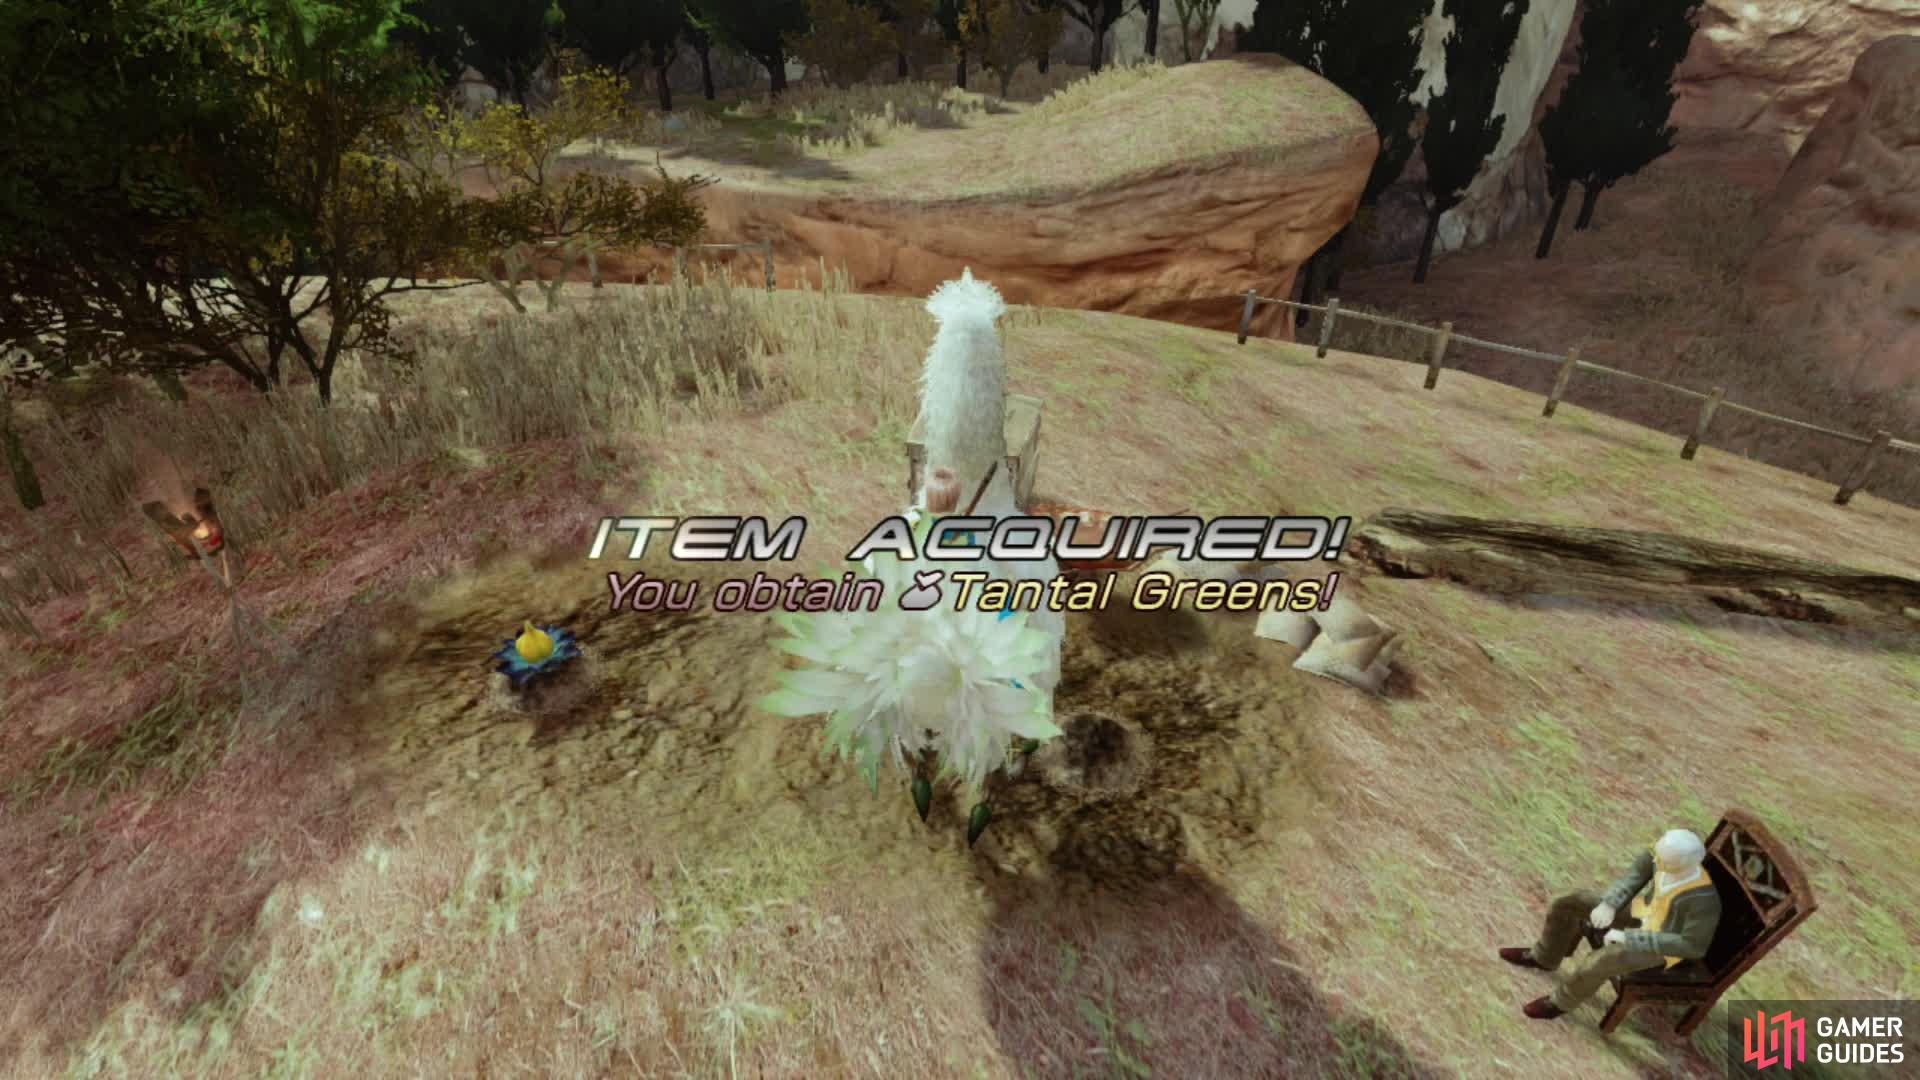 Tantal Greens can be used to heal the Chocobo or sold for profit.